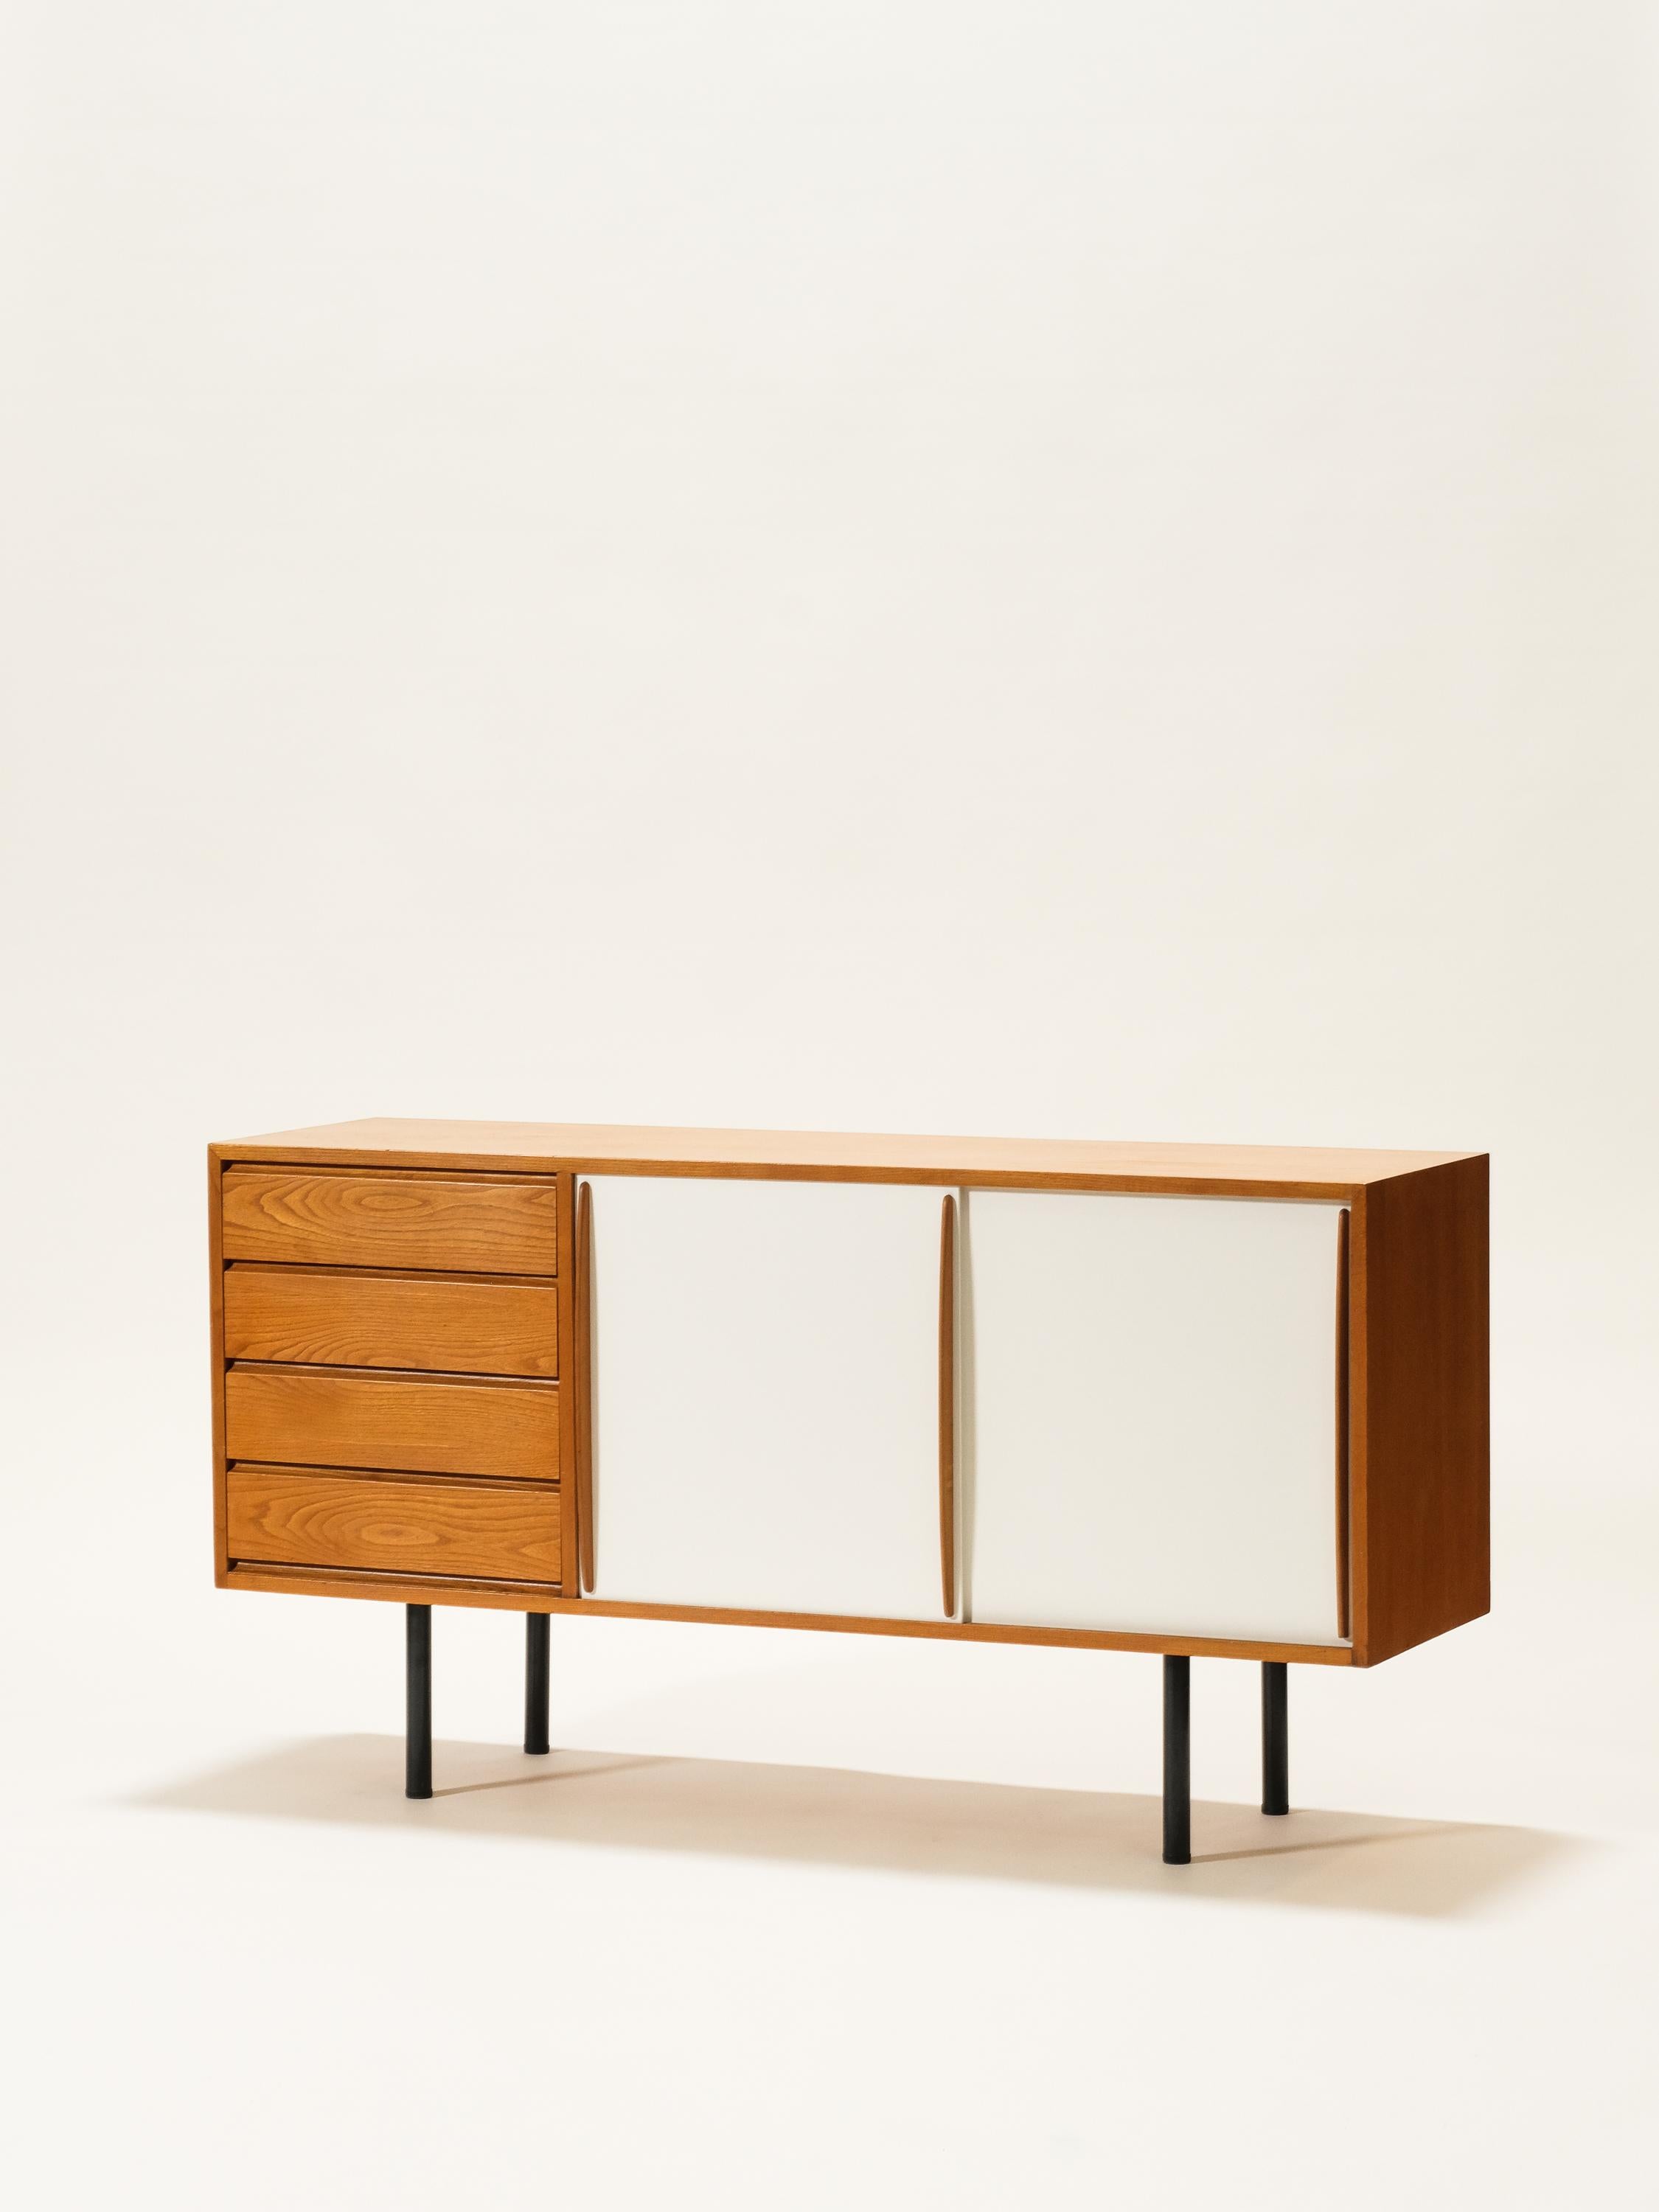 A wonderful sideboard by Finnish designer Olli Borg. Model 4004 for Asko, Finland c. 1950s. A set of 4 drawers, 2 sliding doors and shelving interior, metal legs.

Length 150 cm, depth 43 cm, height 80 cm.

Wear consistent with age and use.